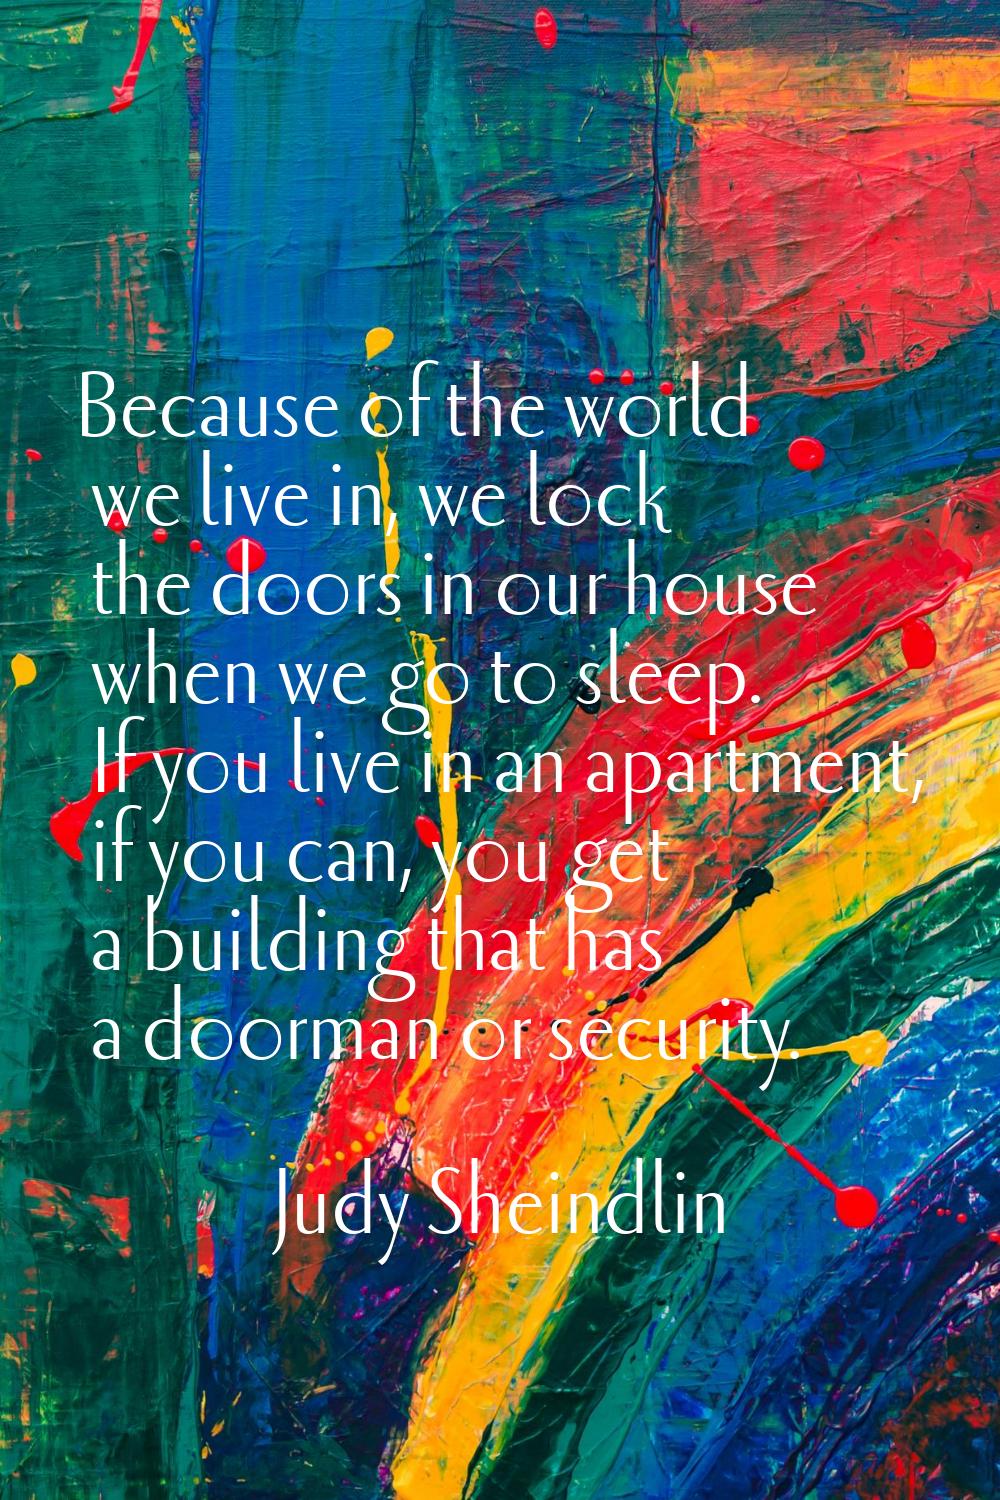 Because of the world we live in, we lock the doors in our house when we go to sleep. If you live in